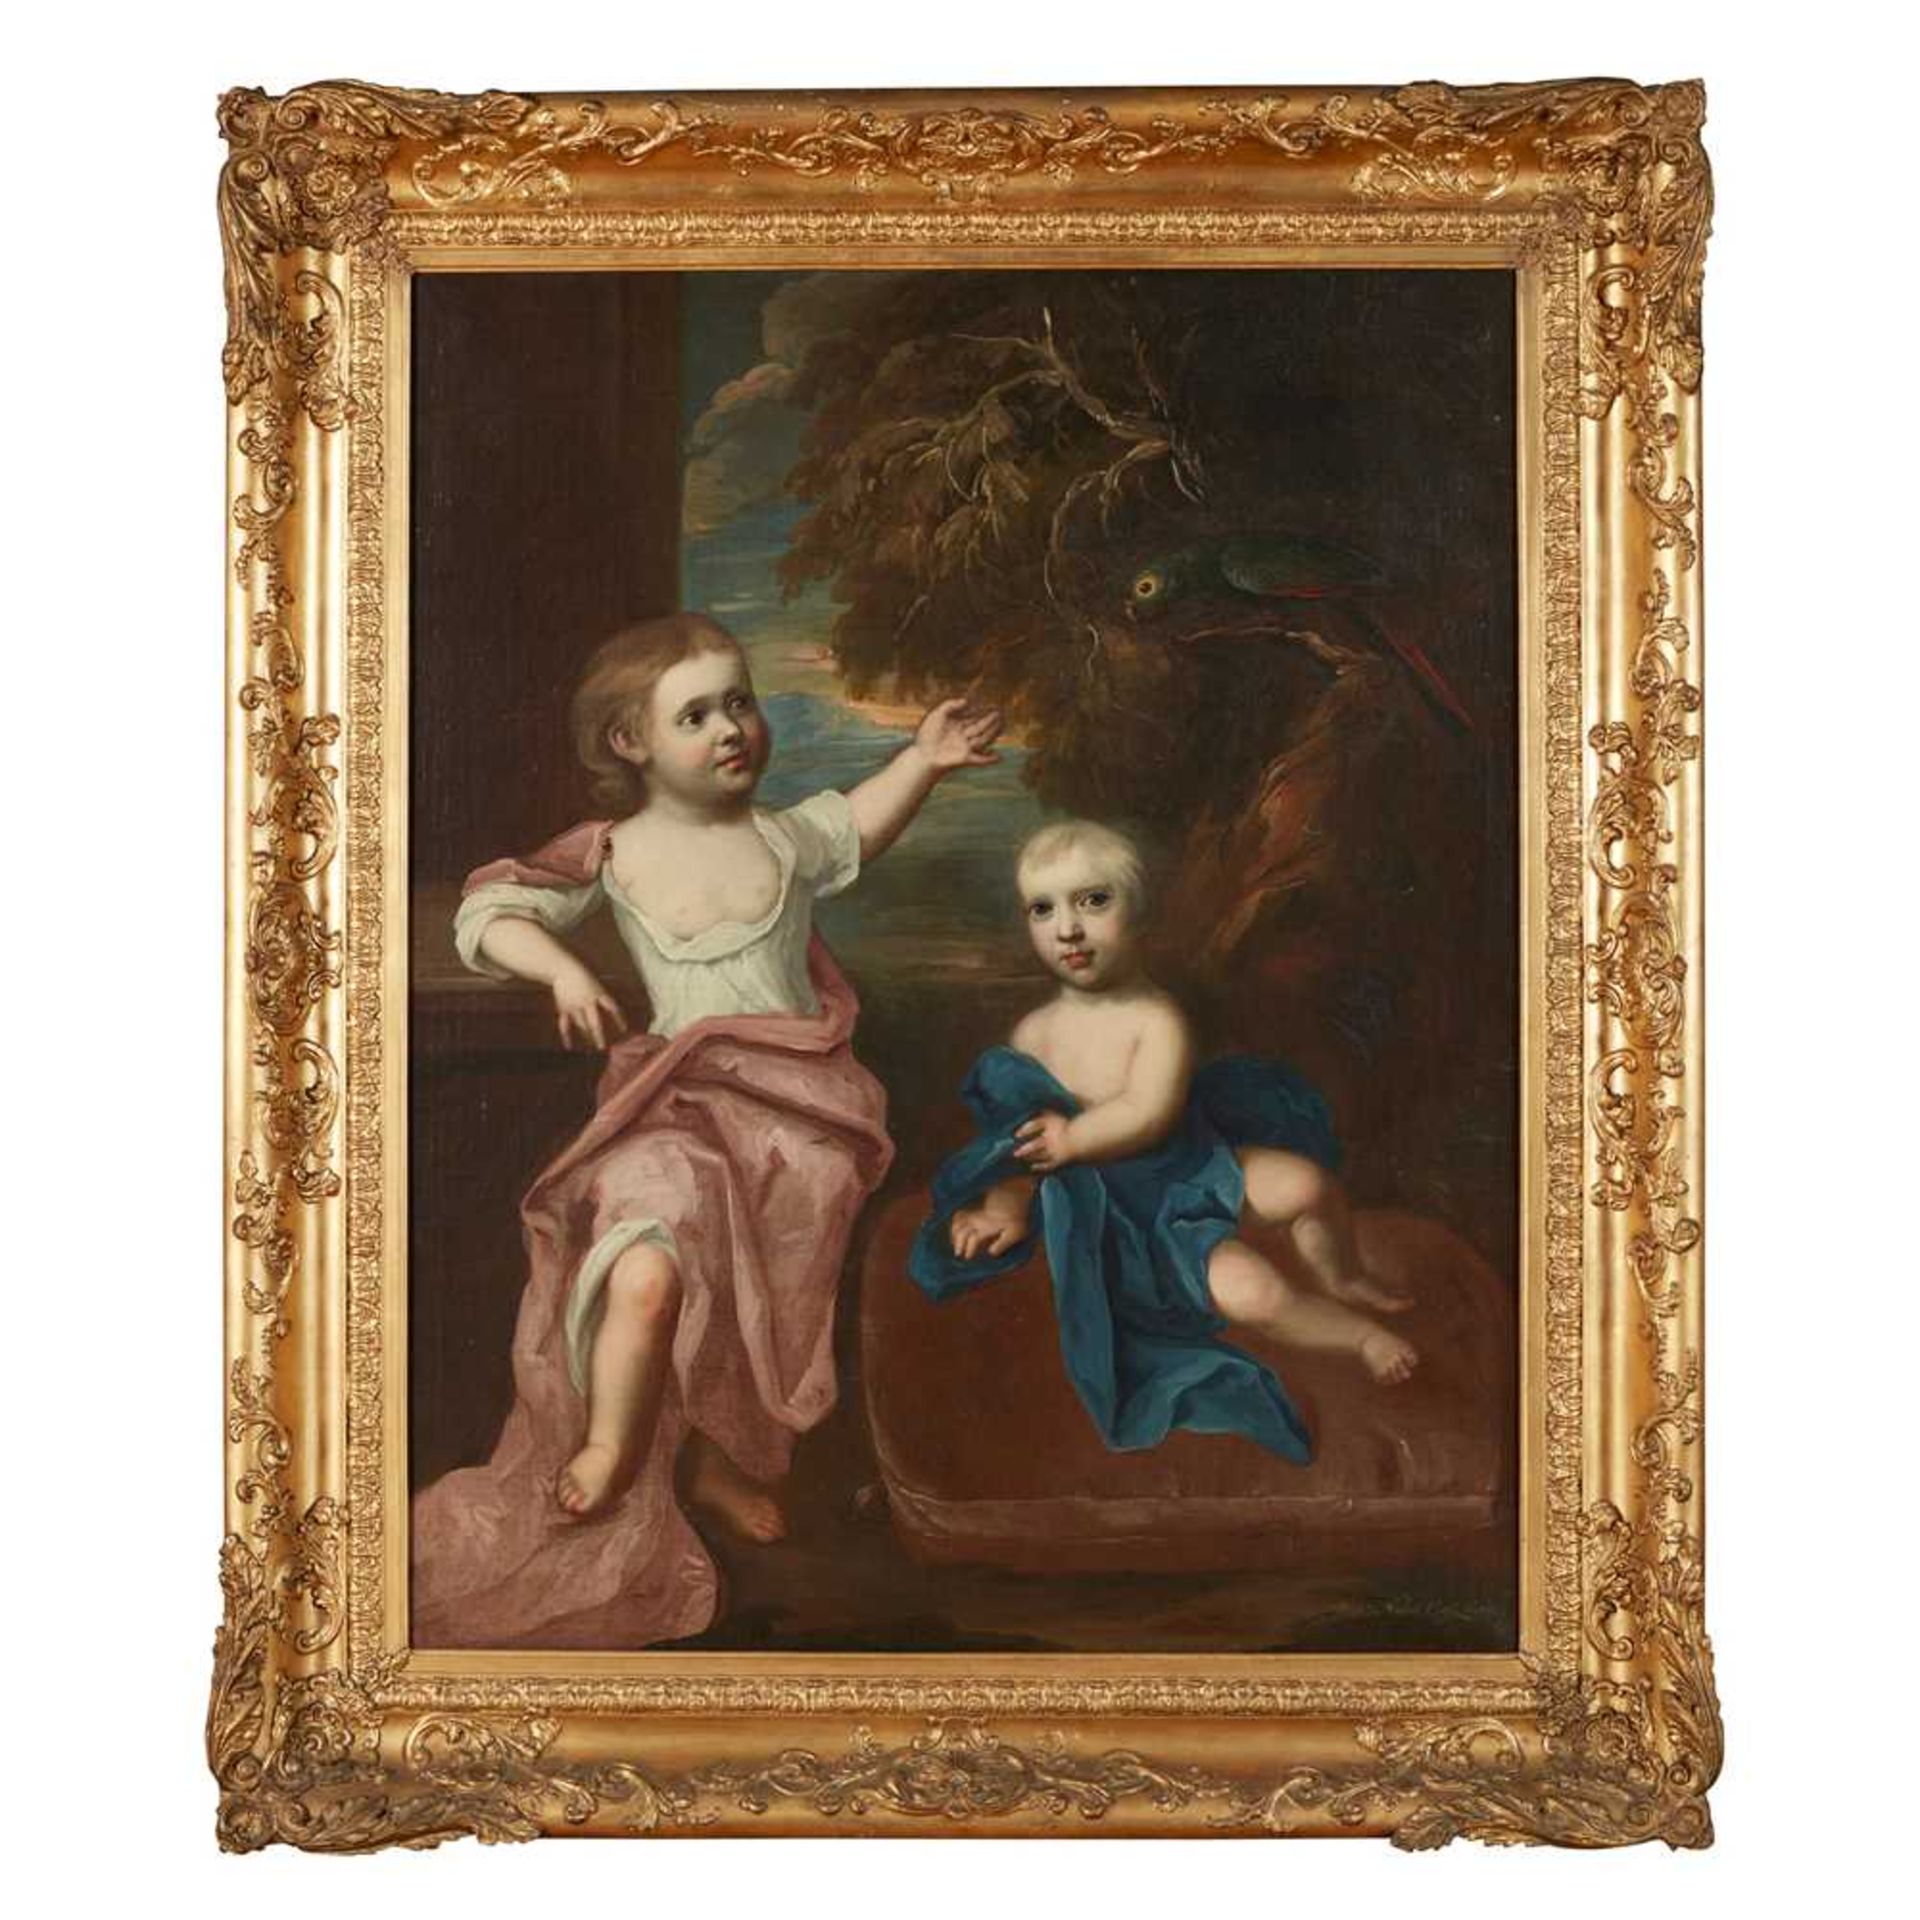 LATE 17TH CENTURY BRITISH SCHOOL DOUBLE PORTRAIT OF TWO BOYS IN LANDCSAPE - Image 2 of 3